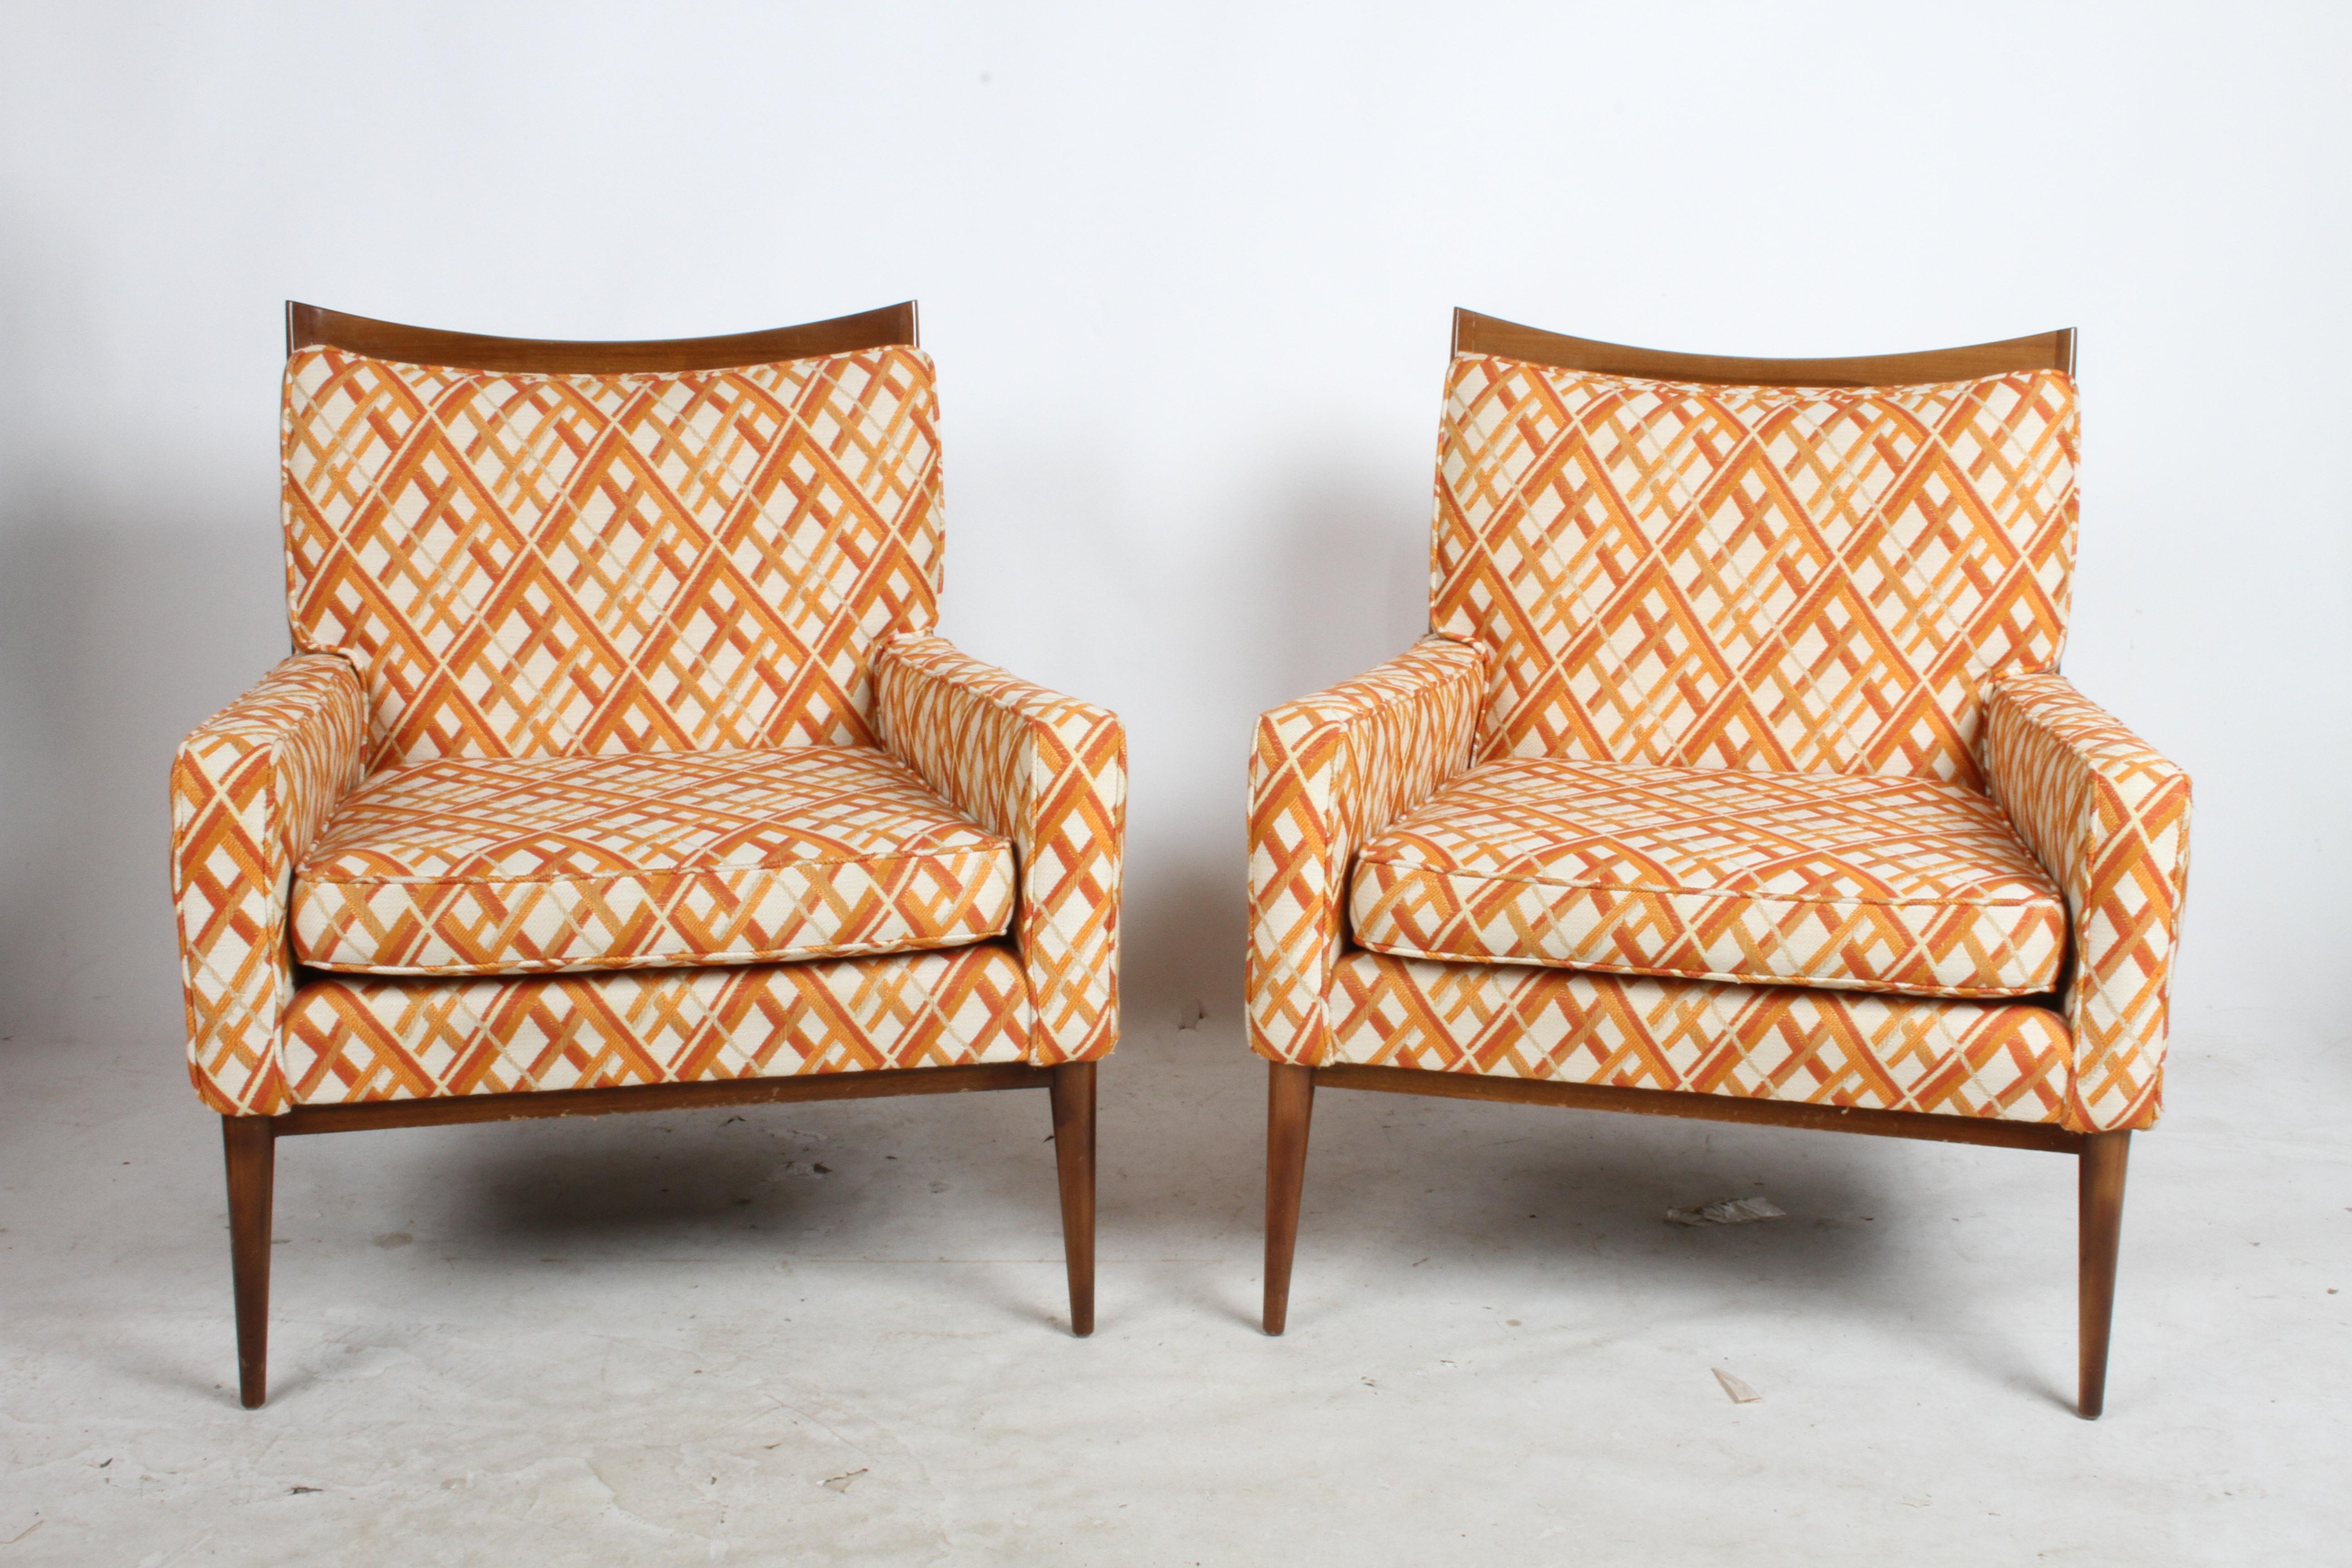 Pair of Paul McCobb for his Directional line model 1322 lounge chairs, shown with original fabric and finish. Finish to be restored prior to shipping, fabric is in incredible condition, some stiffness to foam on seat backs. Fresh from one owner